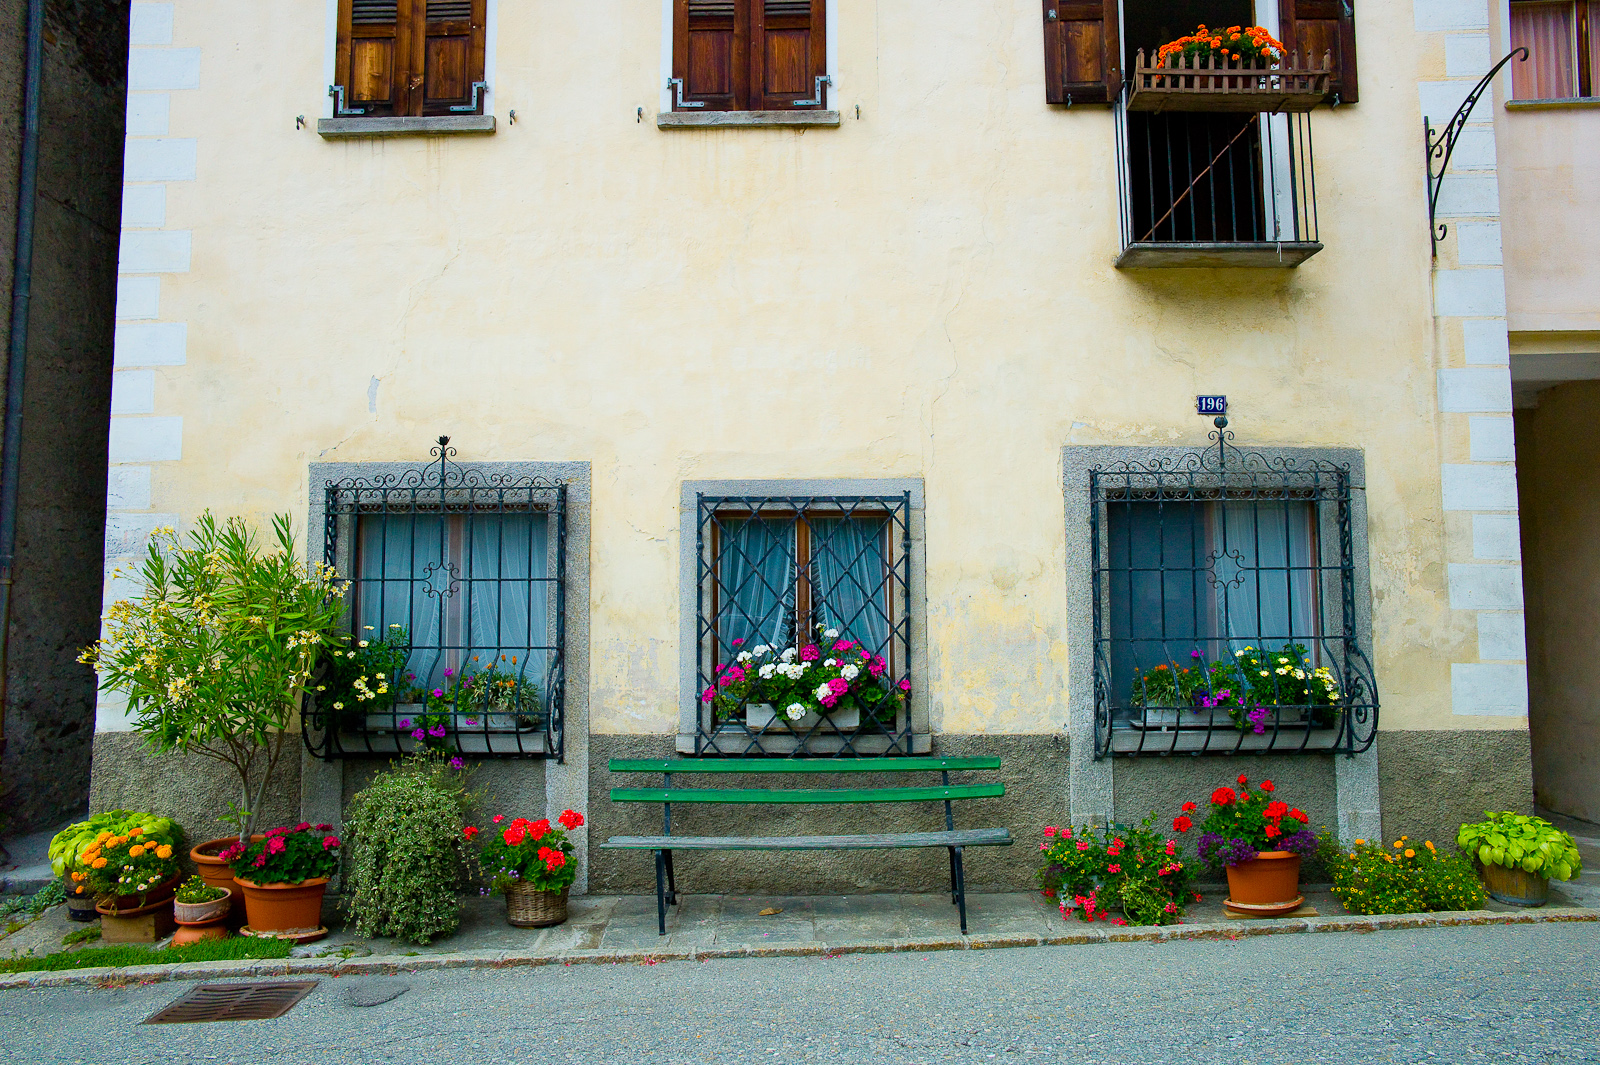 Are all Italian houses a photo opportunity?